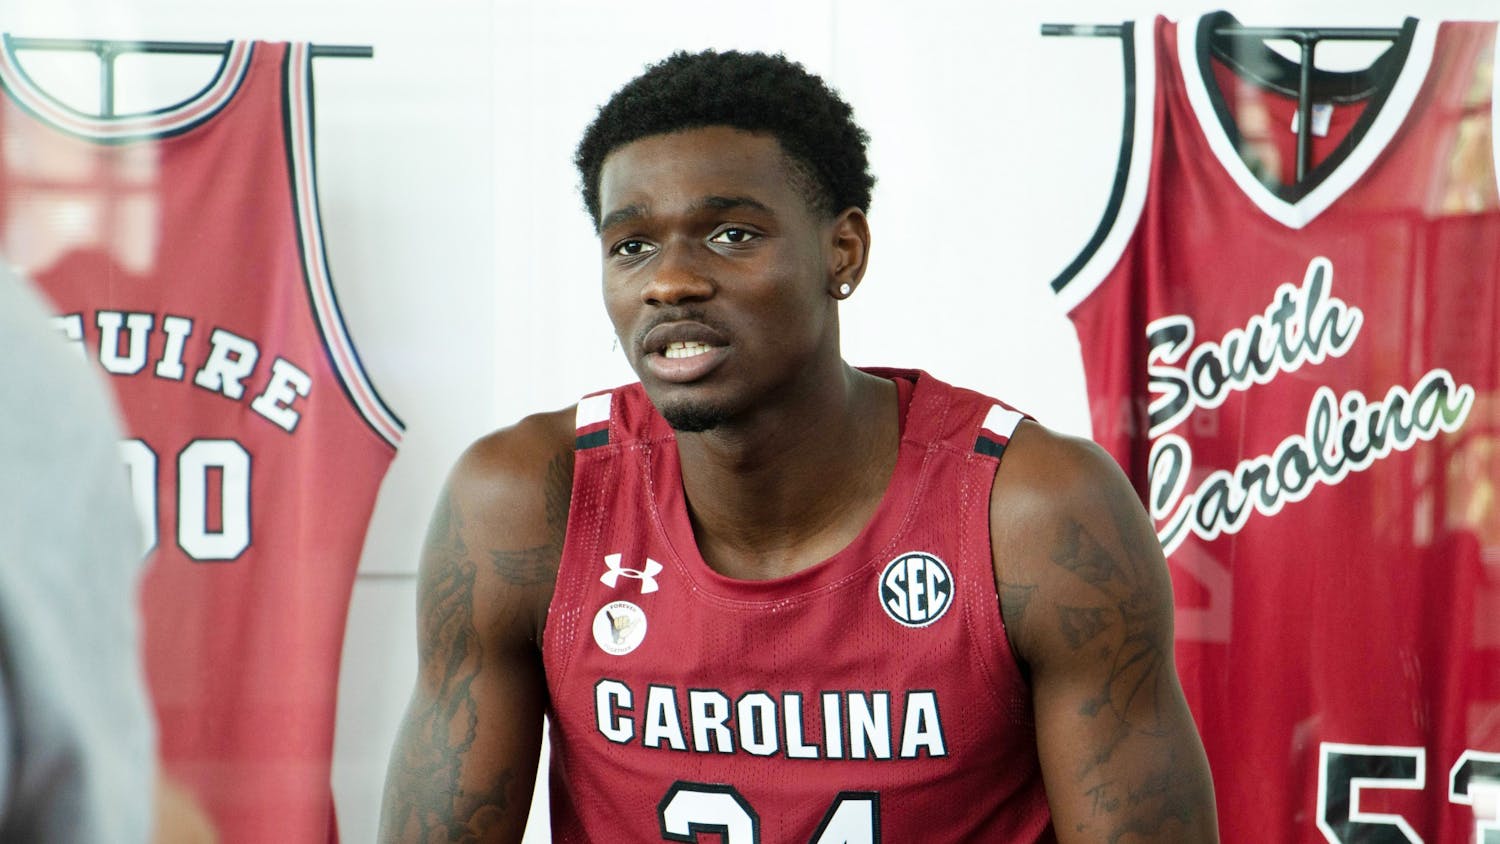 Senior forward Keyshawn Bryant speaks to the press during the team's media day on Oct. 14, 2021.